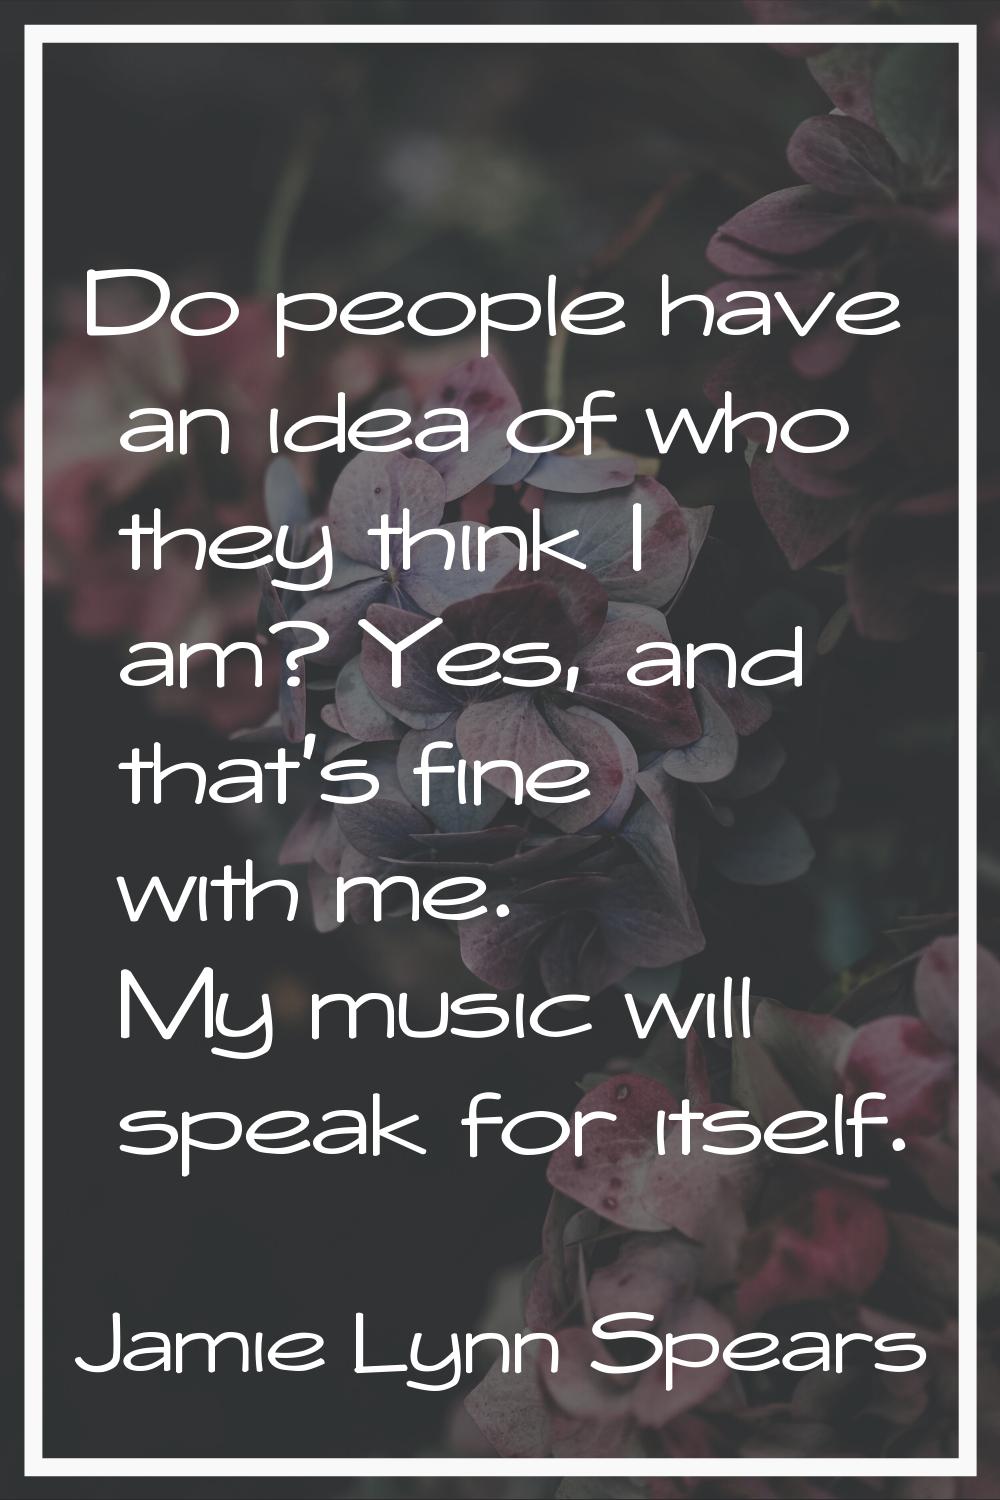 Do people have an idea of who they think I am? Yes, and that's fine with me. My music will speak fo